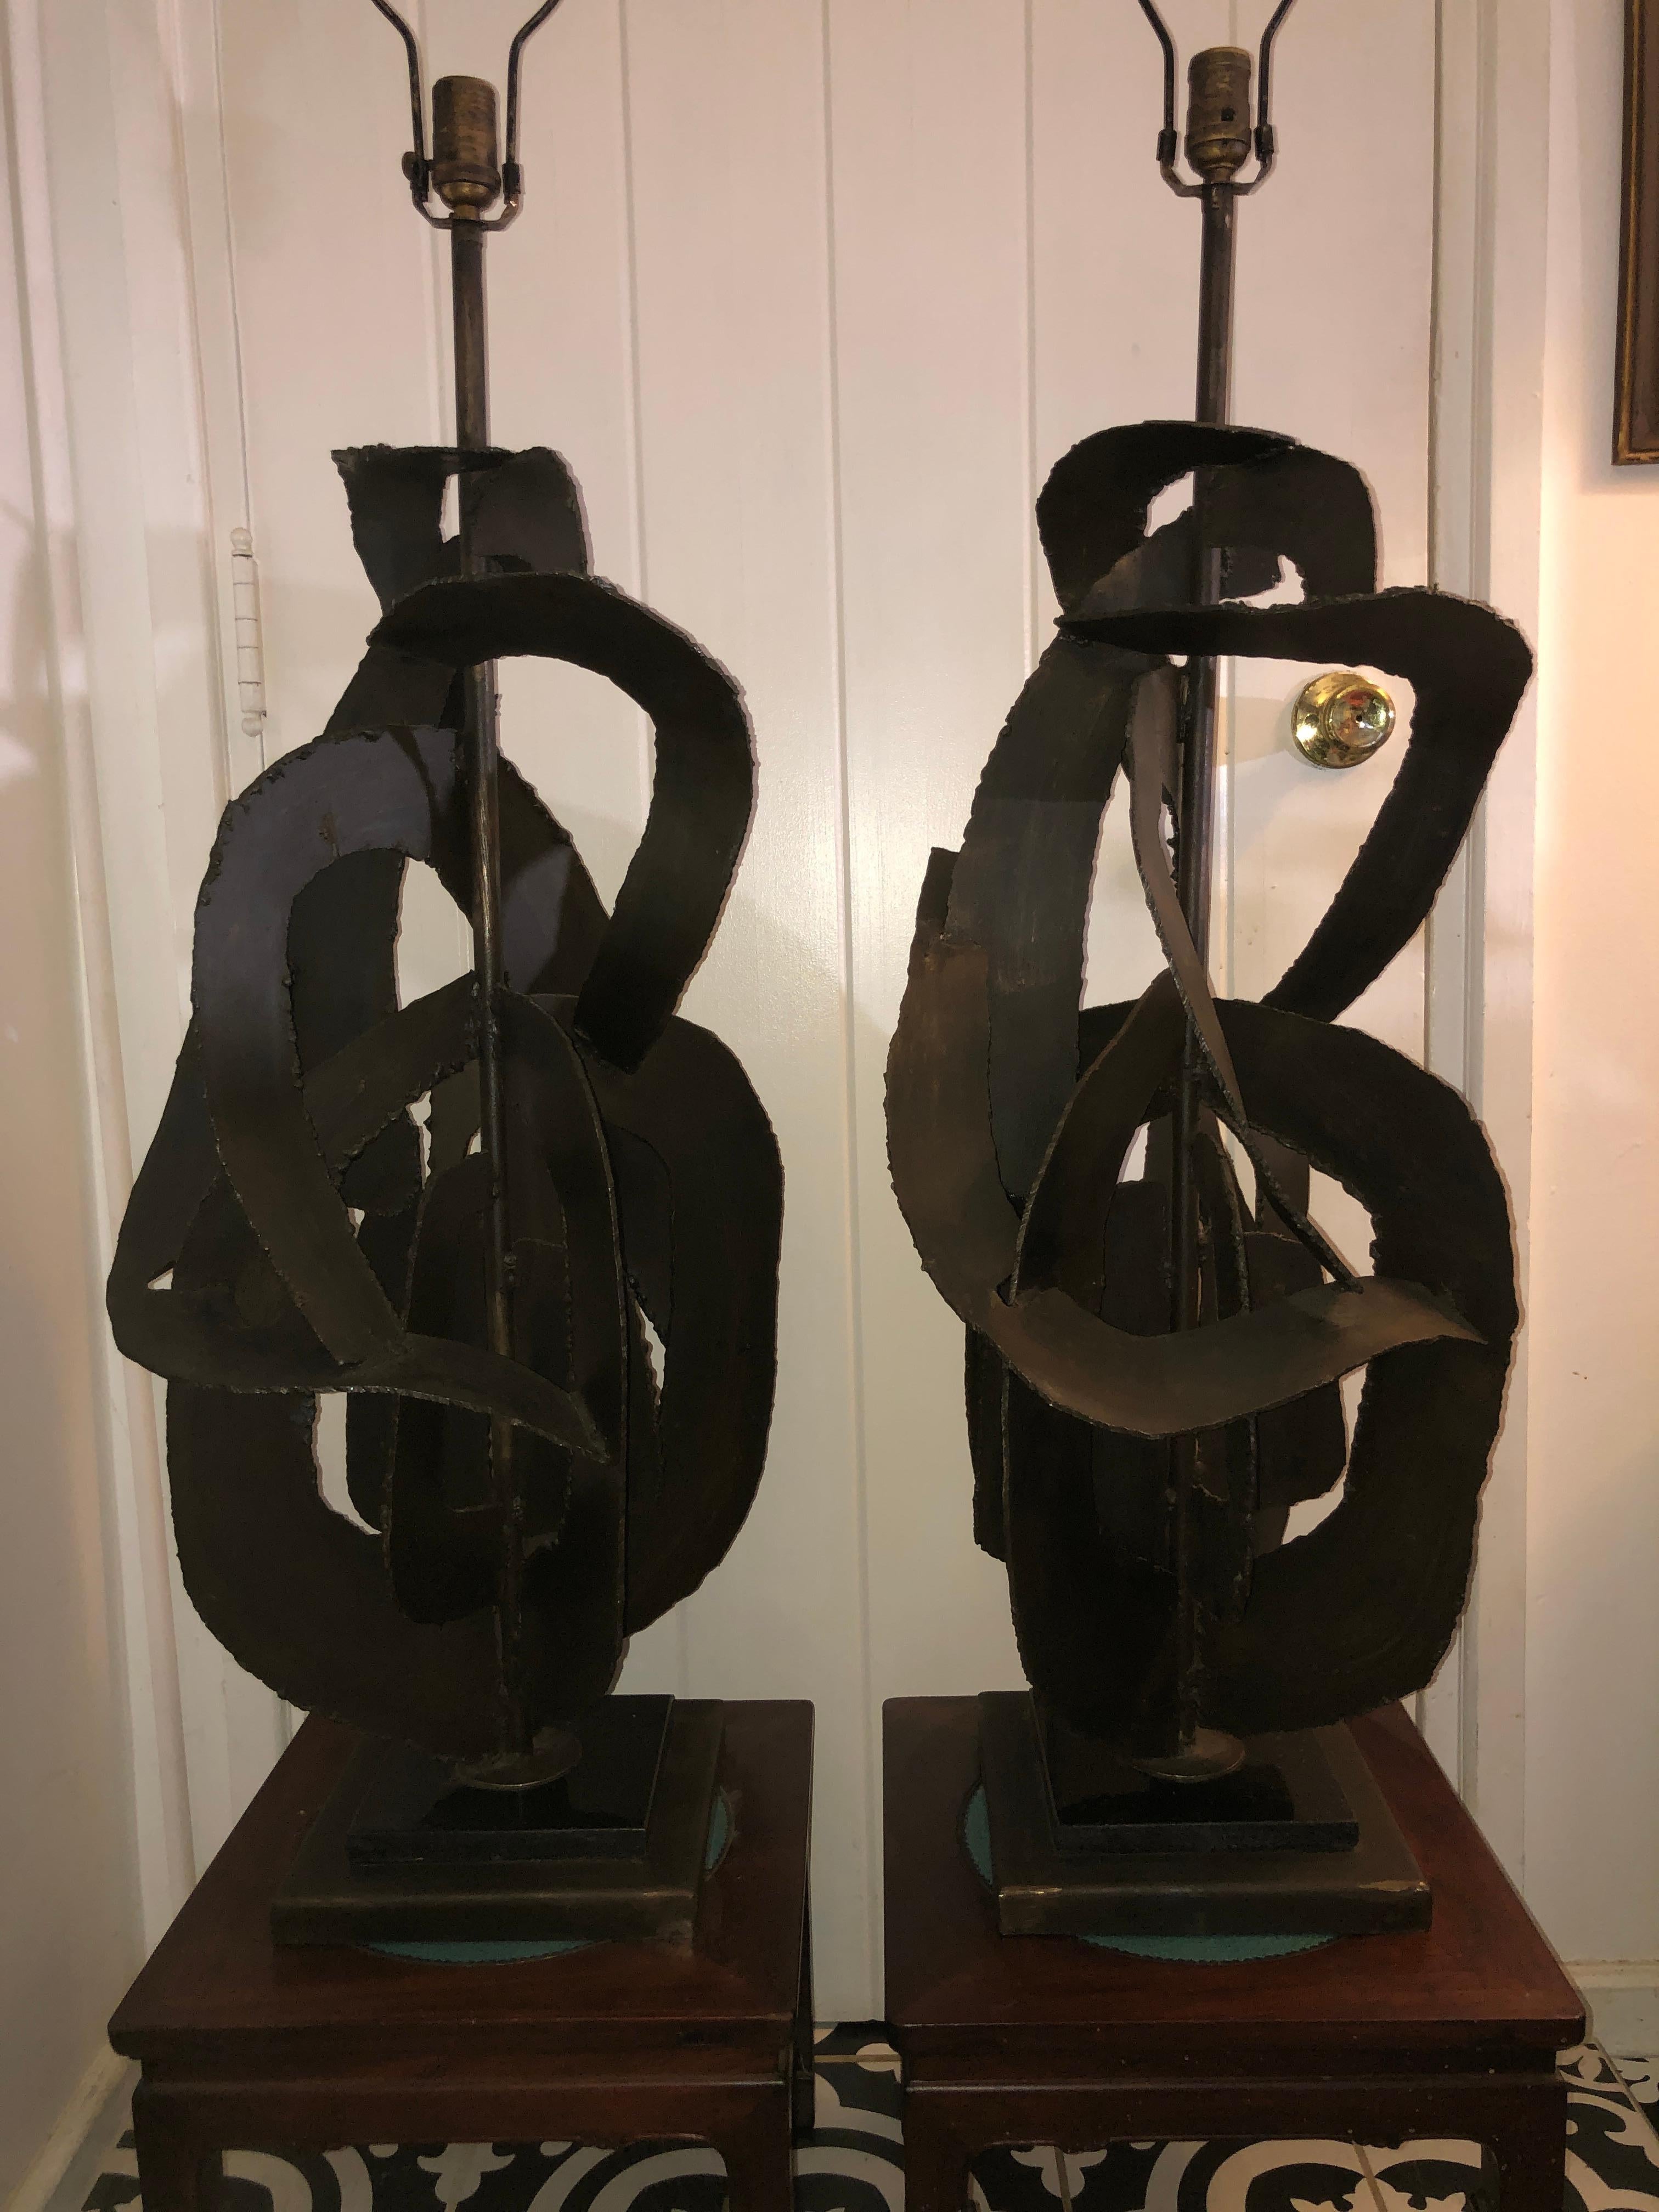 These Monumental pair of Brutalist lamps were designed by Richard Barr for the Laurel Lamp Company, Newark, N.J. This pair is much larger than most we have had in the past and were one of Barr’s “Studio Collection” series.  These lamps consists of